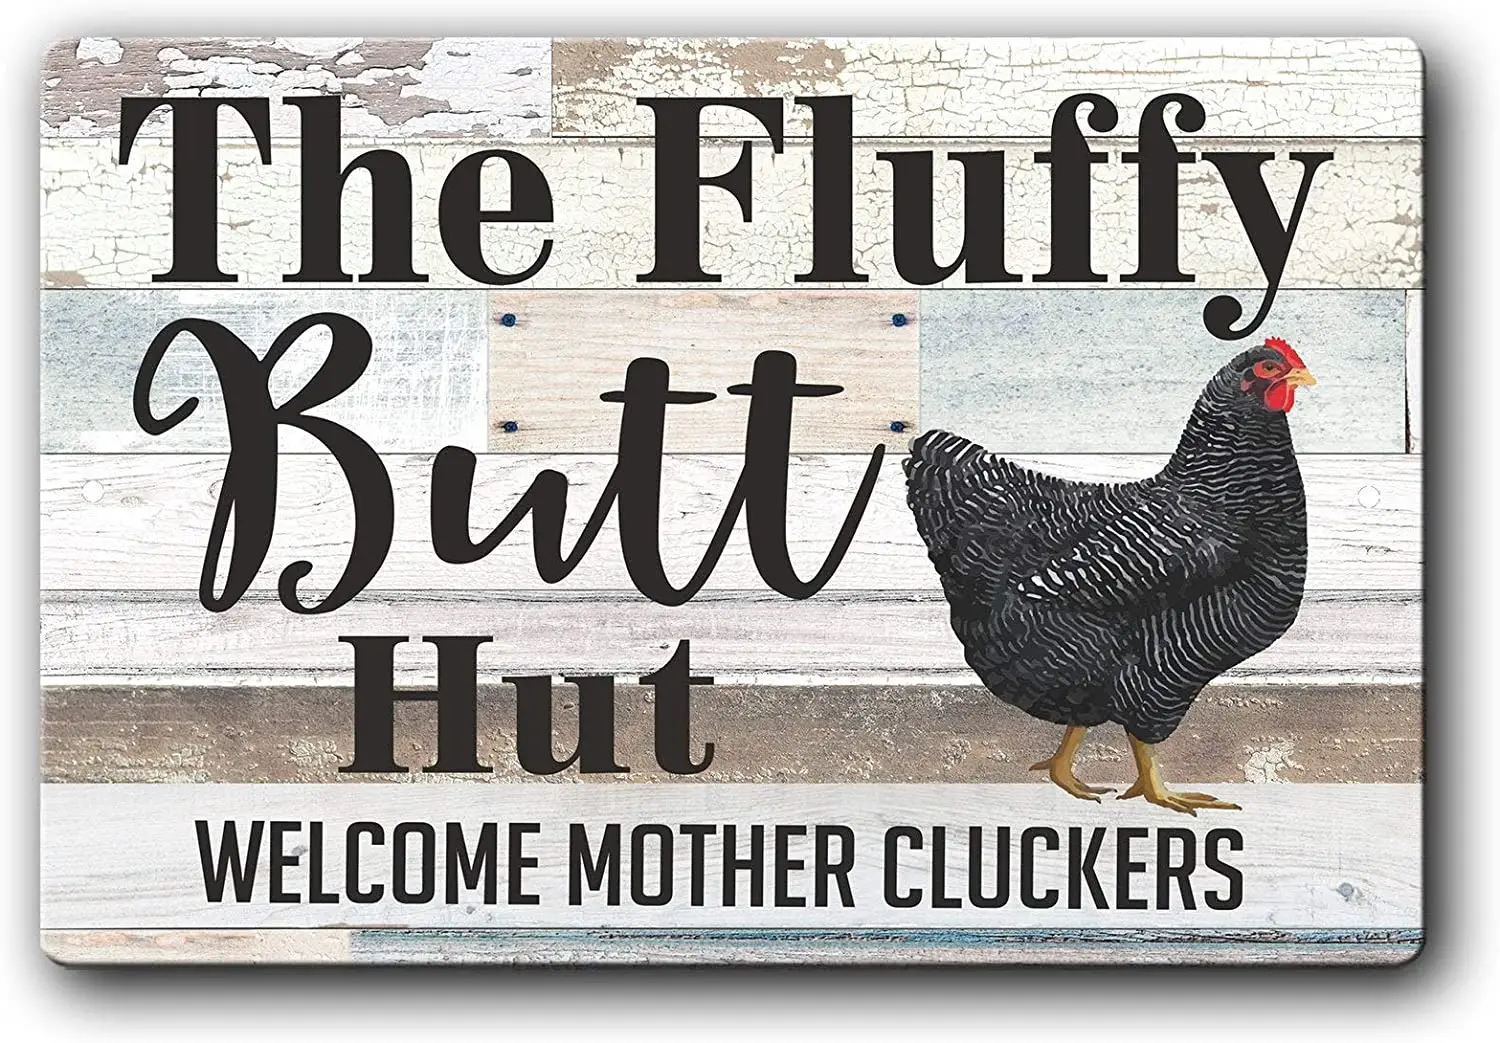 

Fluffy Butt Hut Welcome Mother Cluckers Tin Sign Funny Chicken Coop Sign Rustic Style Decor Metal Tin Sign Wall Panel